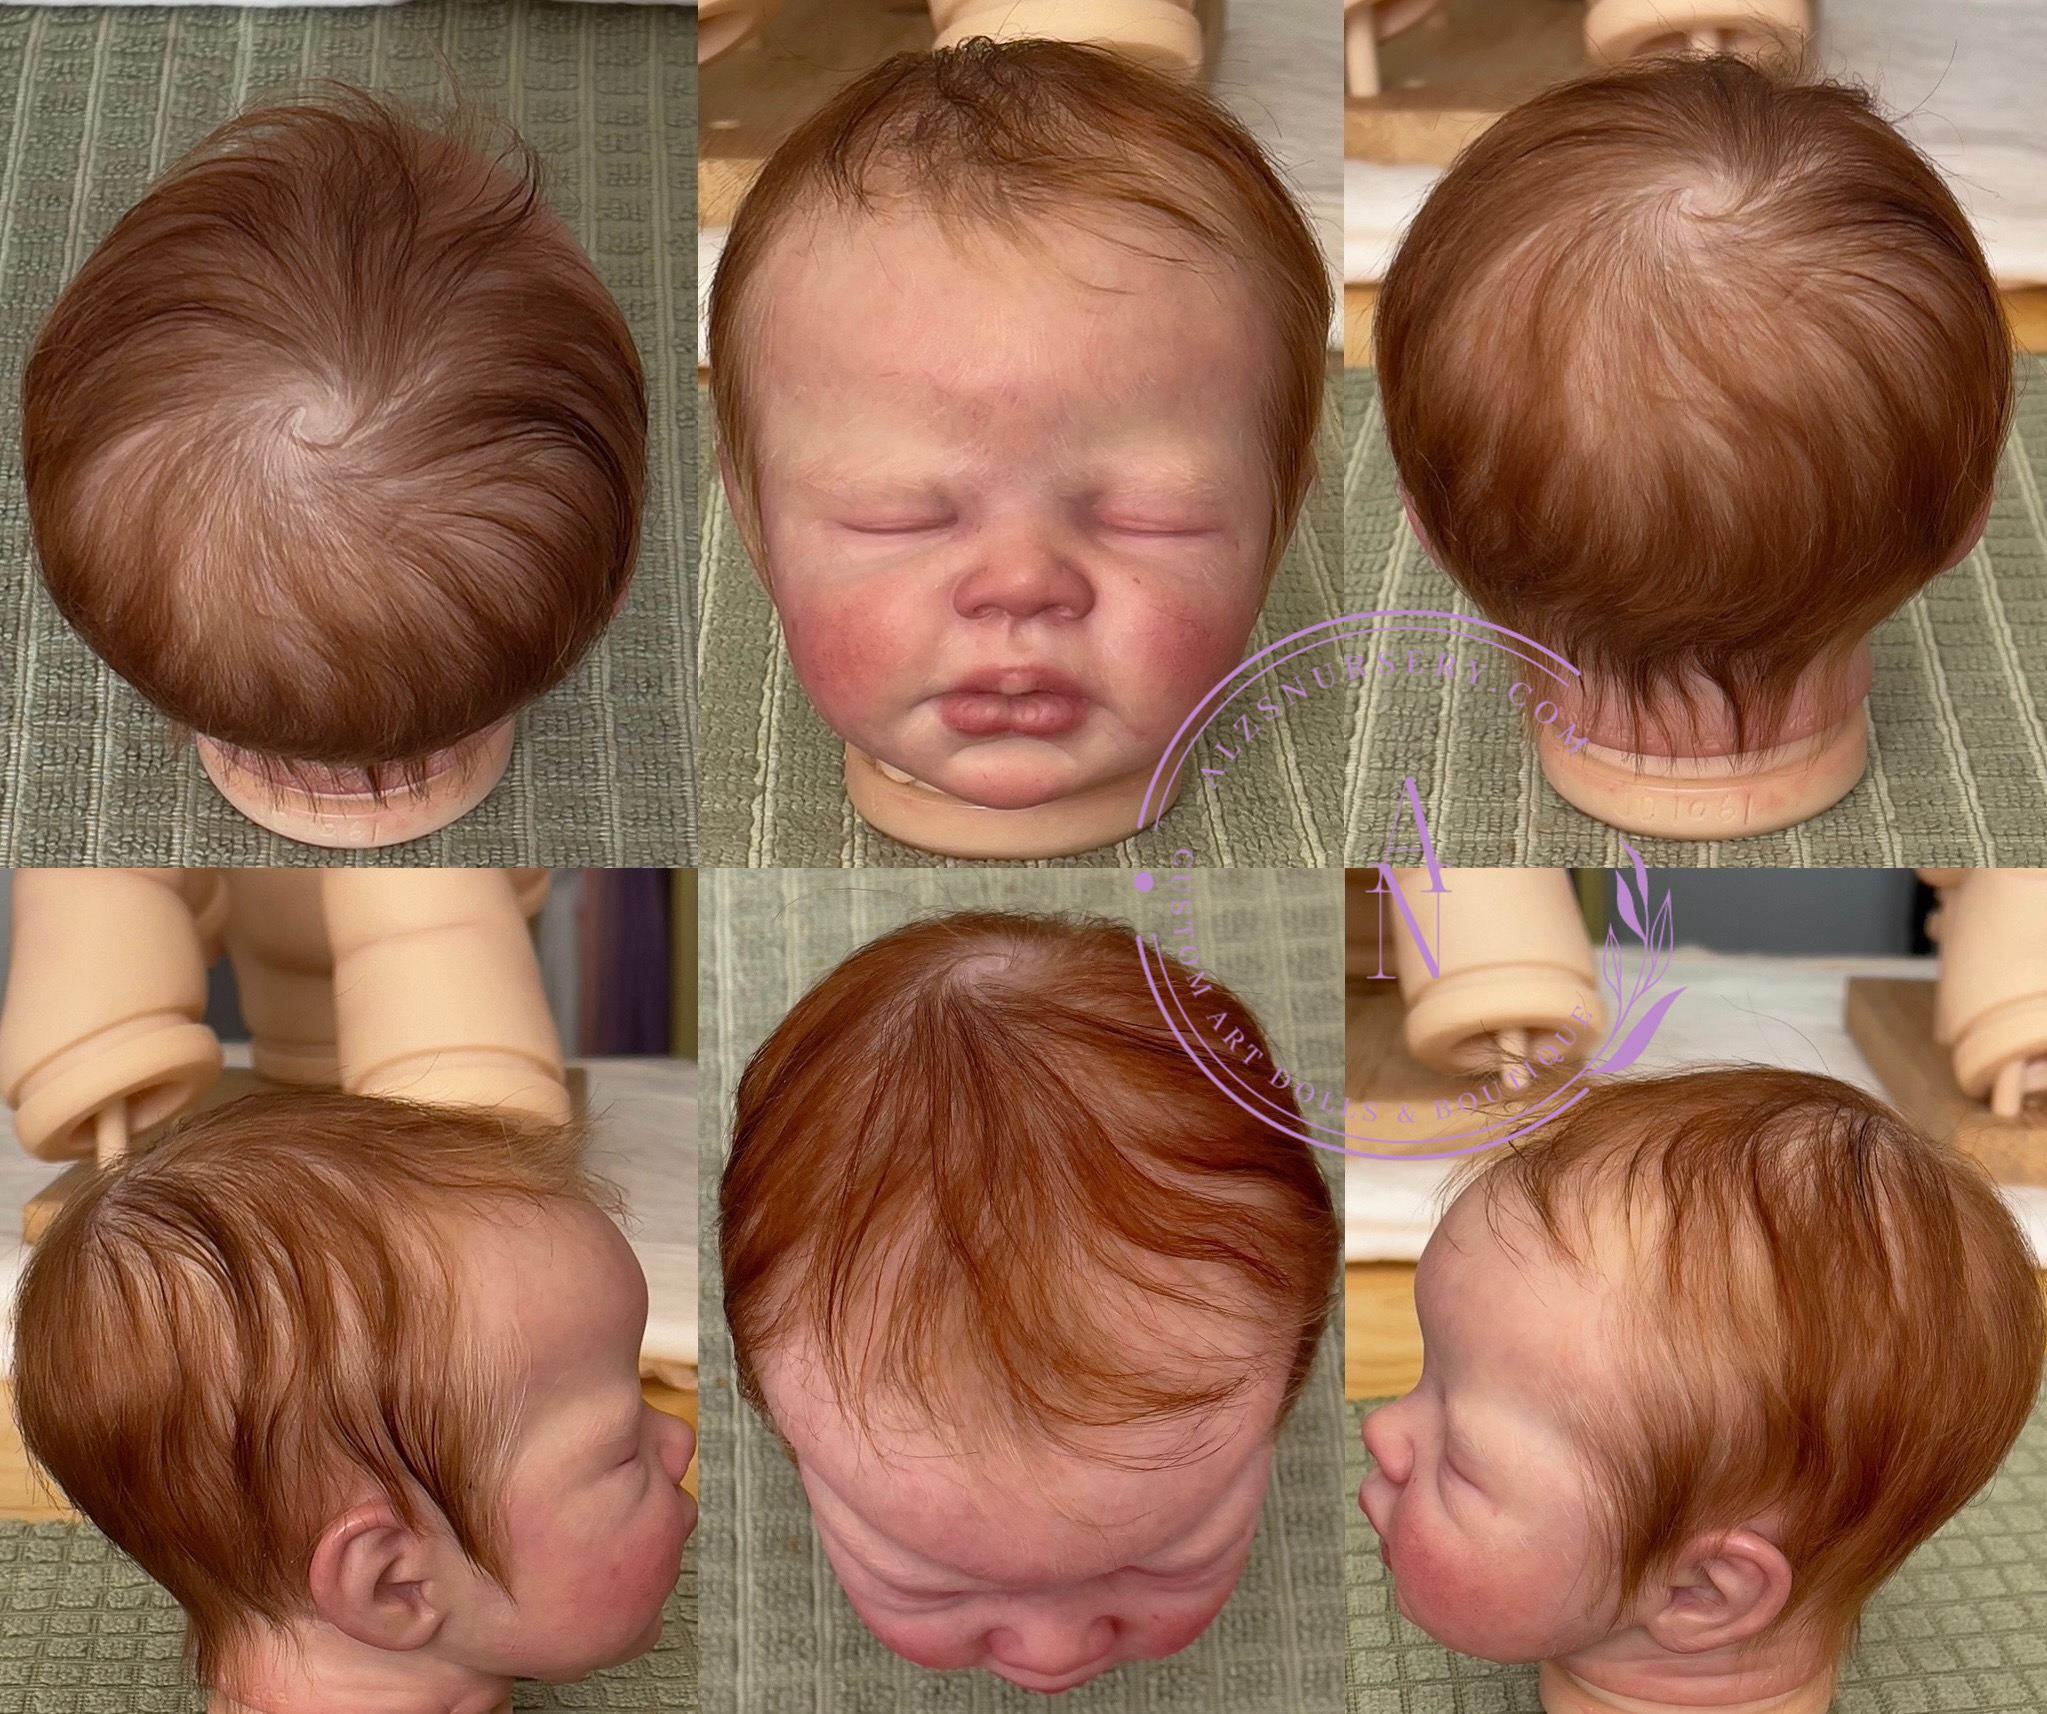 A progression photo showing the different angles of a reborn doll's head having been hand rooted.